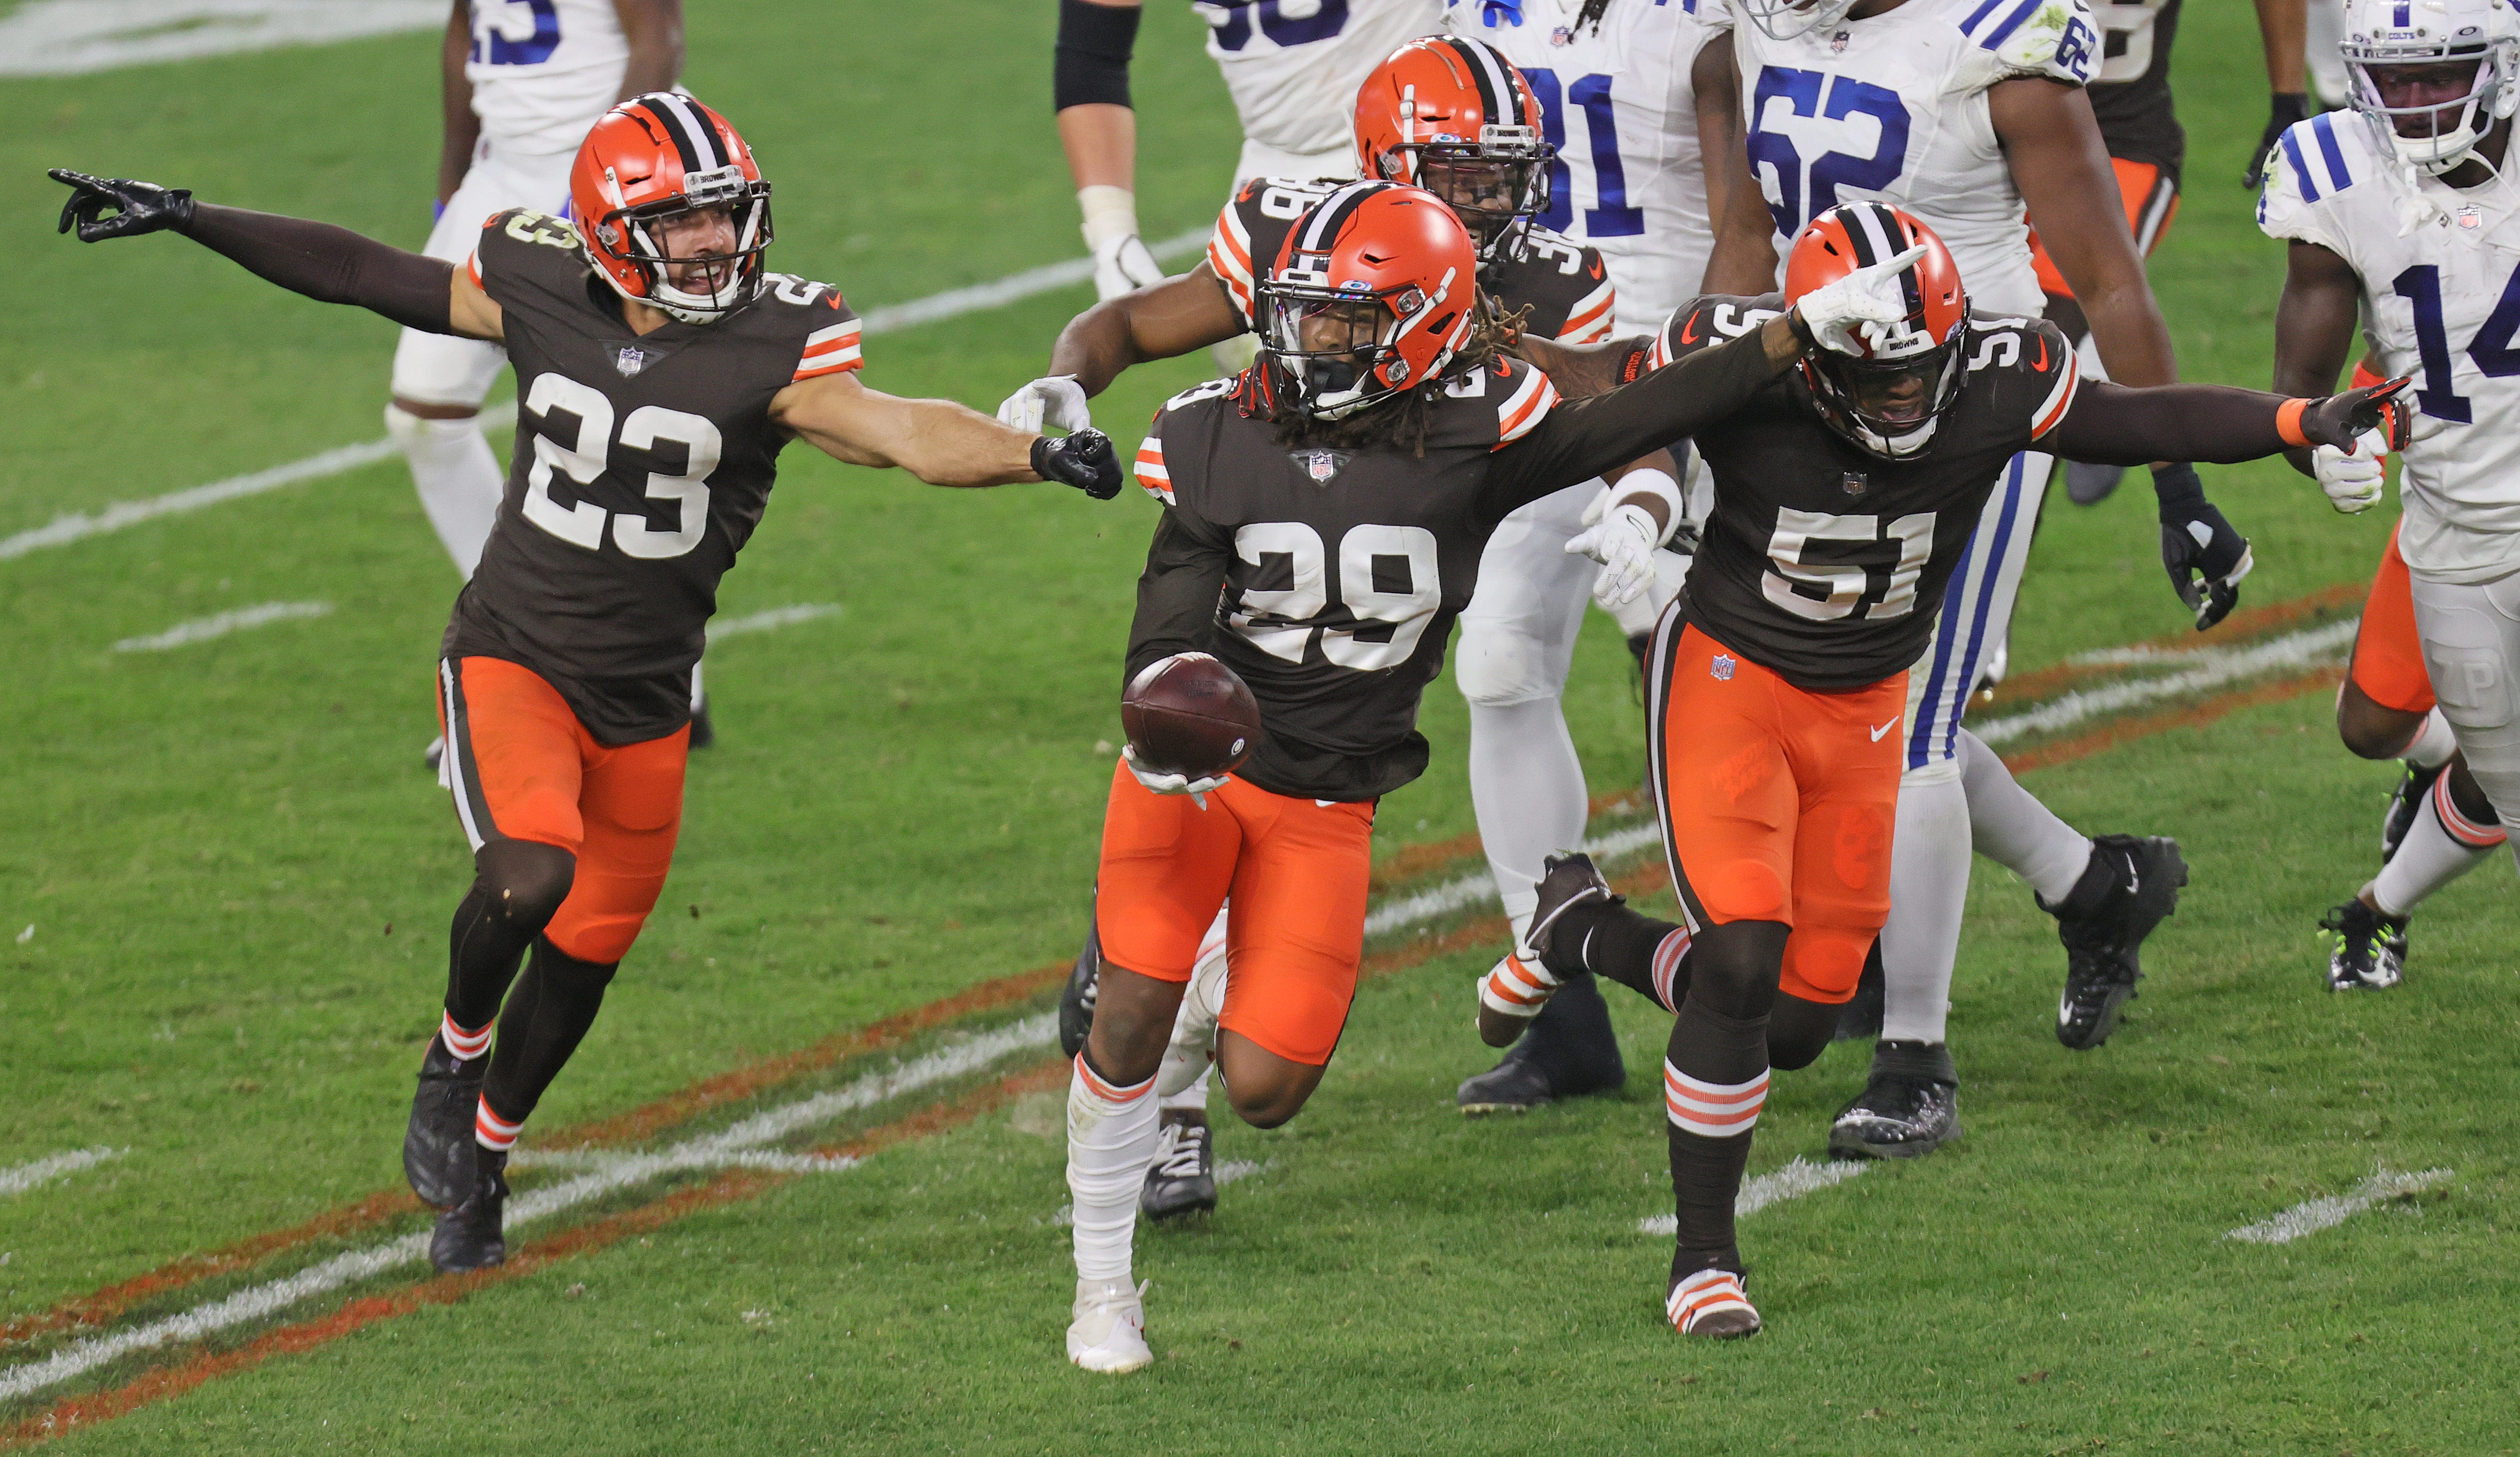 Browns get big plays from unexpected places in win over Colts